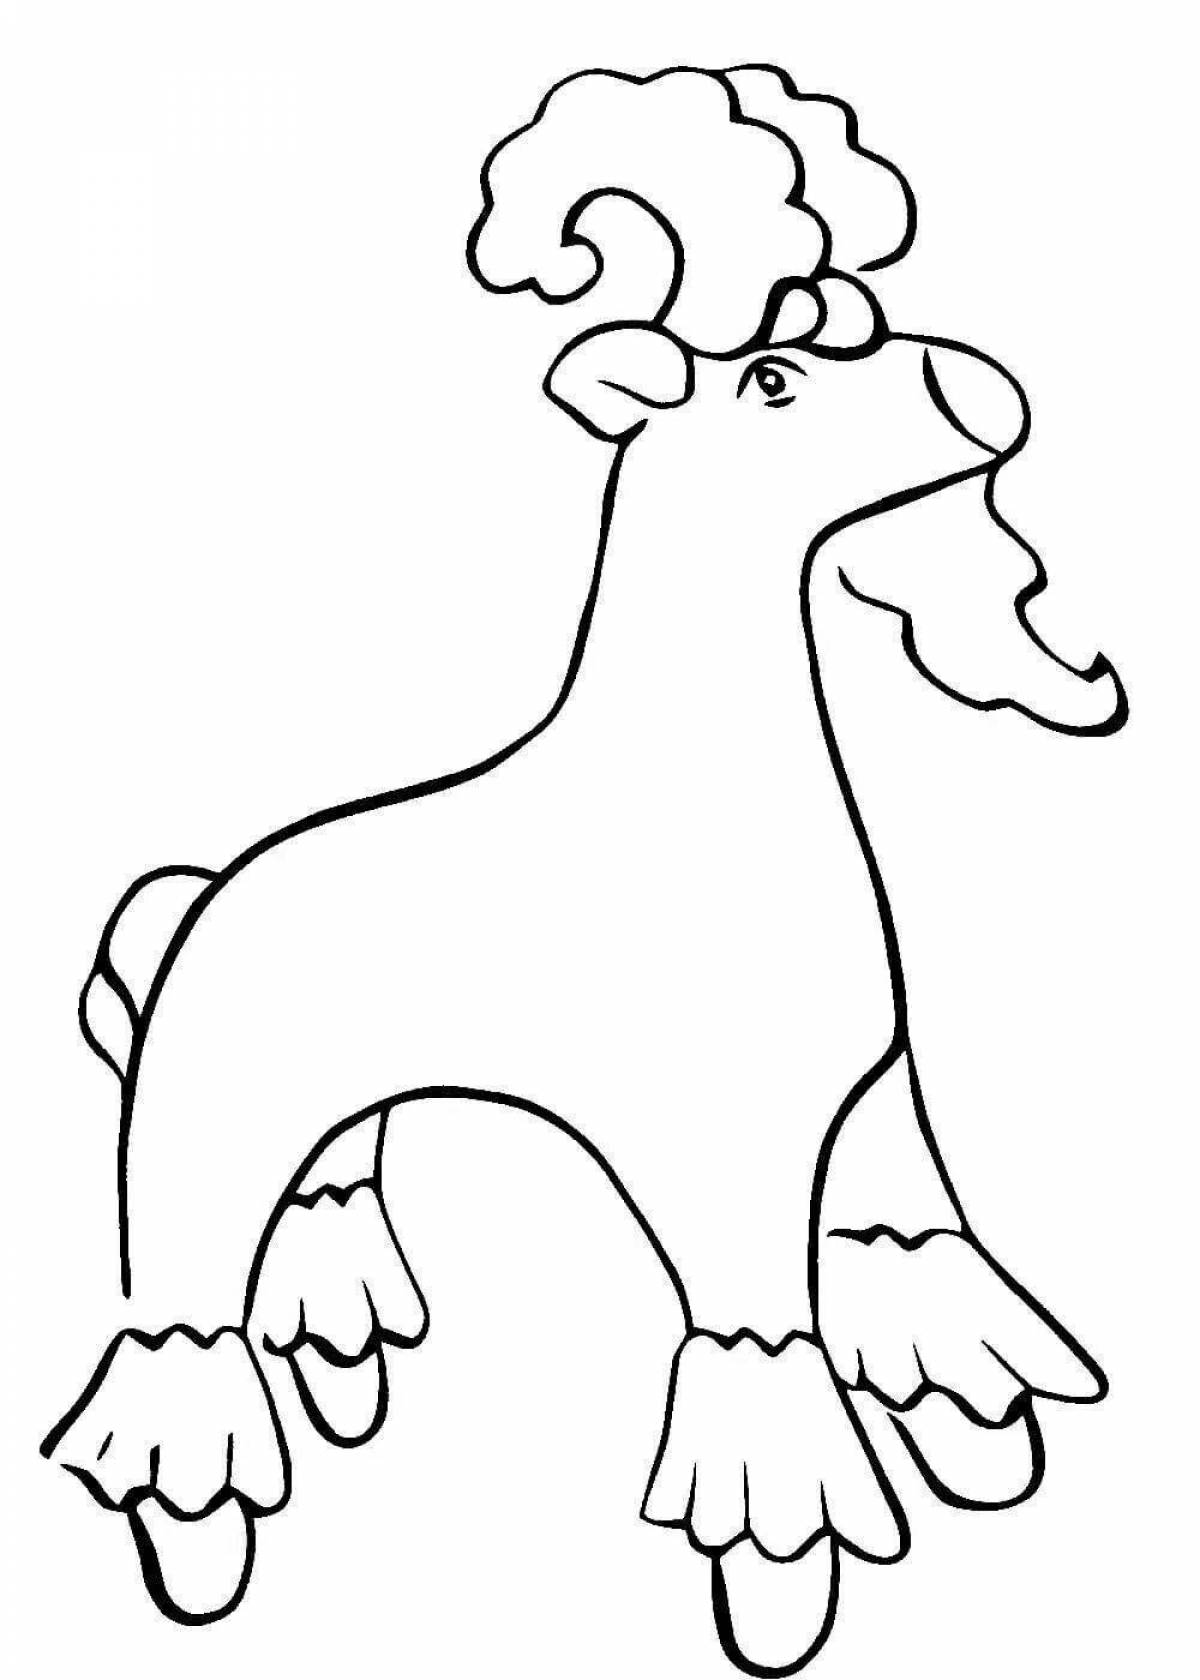 Coloring page charming Dymkovo toy